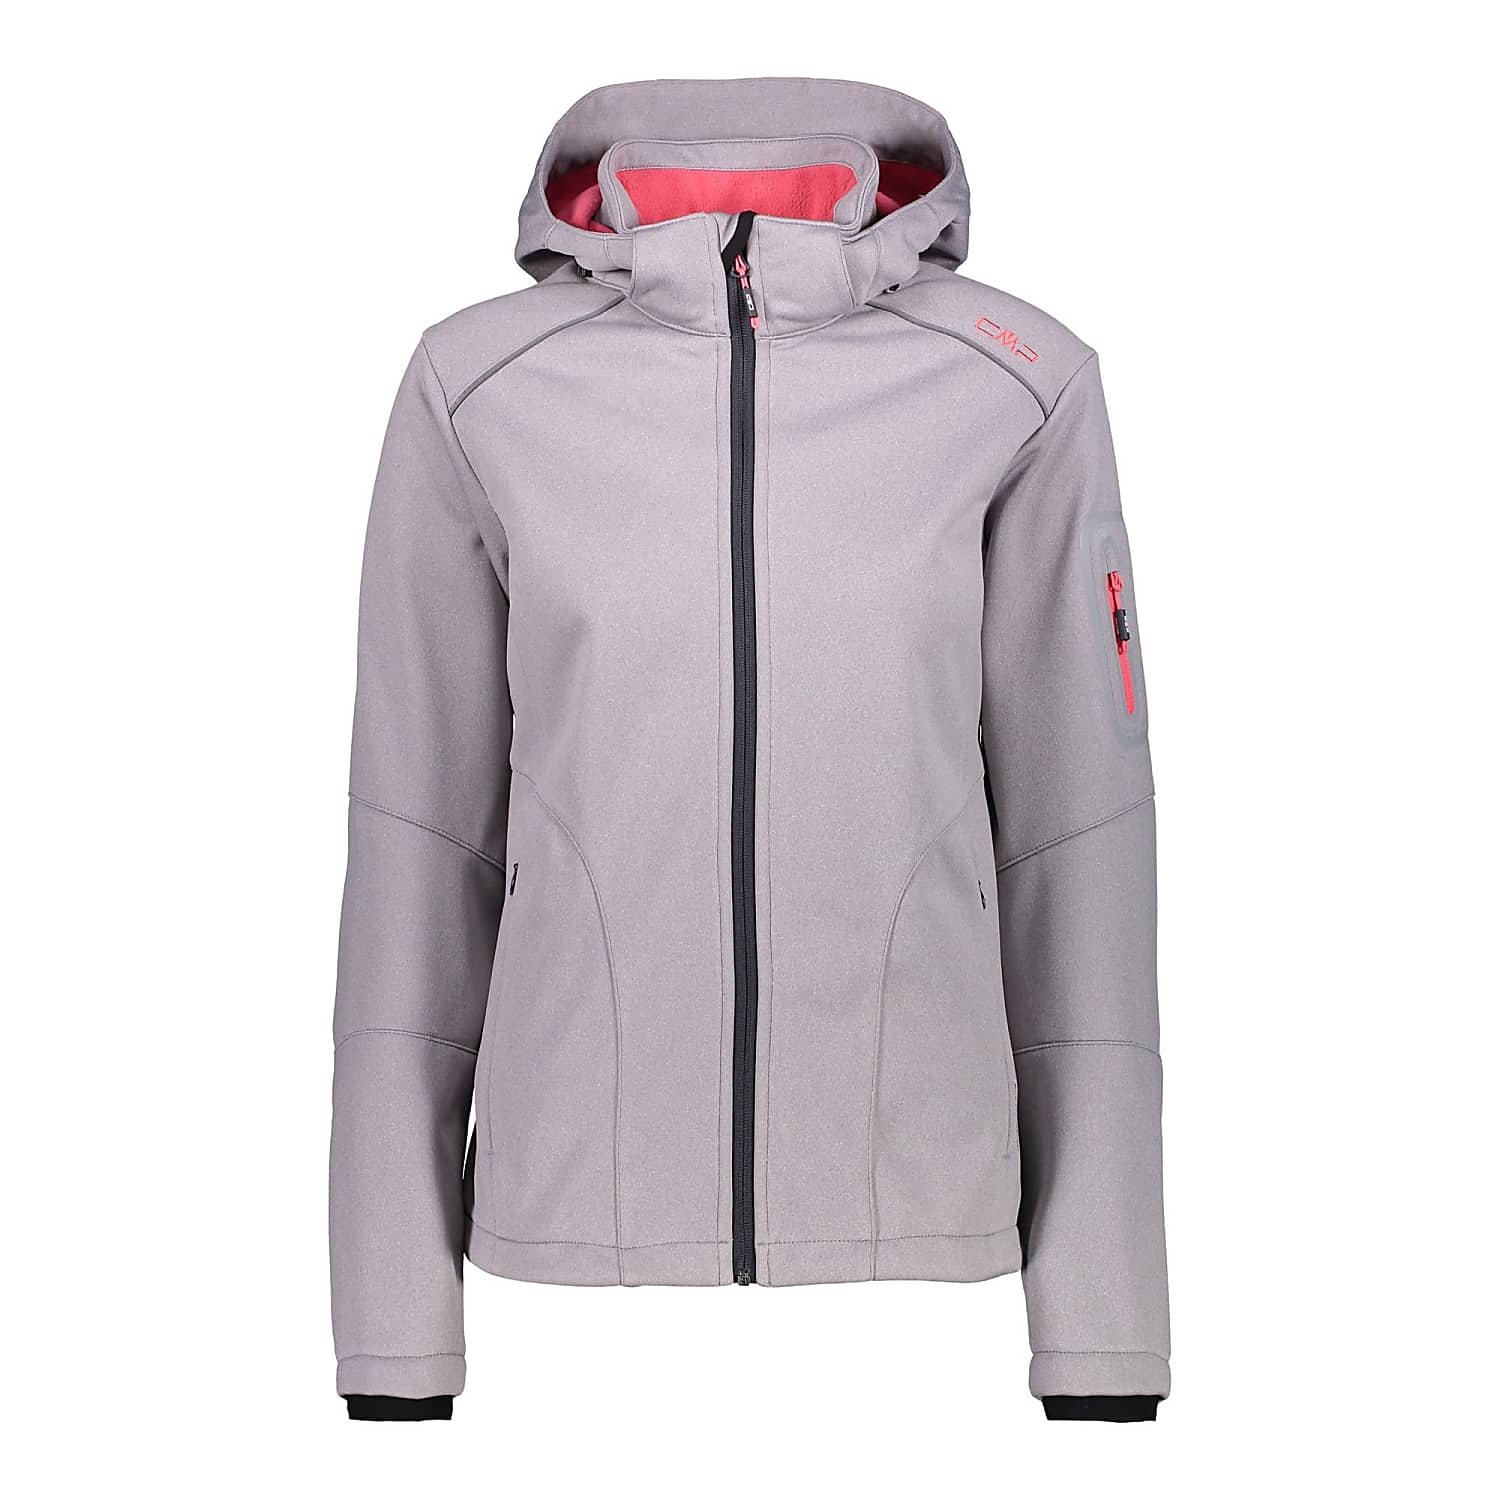 CMP W JACKET ZIP HOOD Mel. and Fast - Corallo shipping SOFTSHELL, cheap Argento 